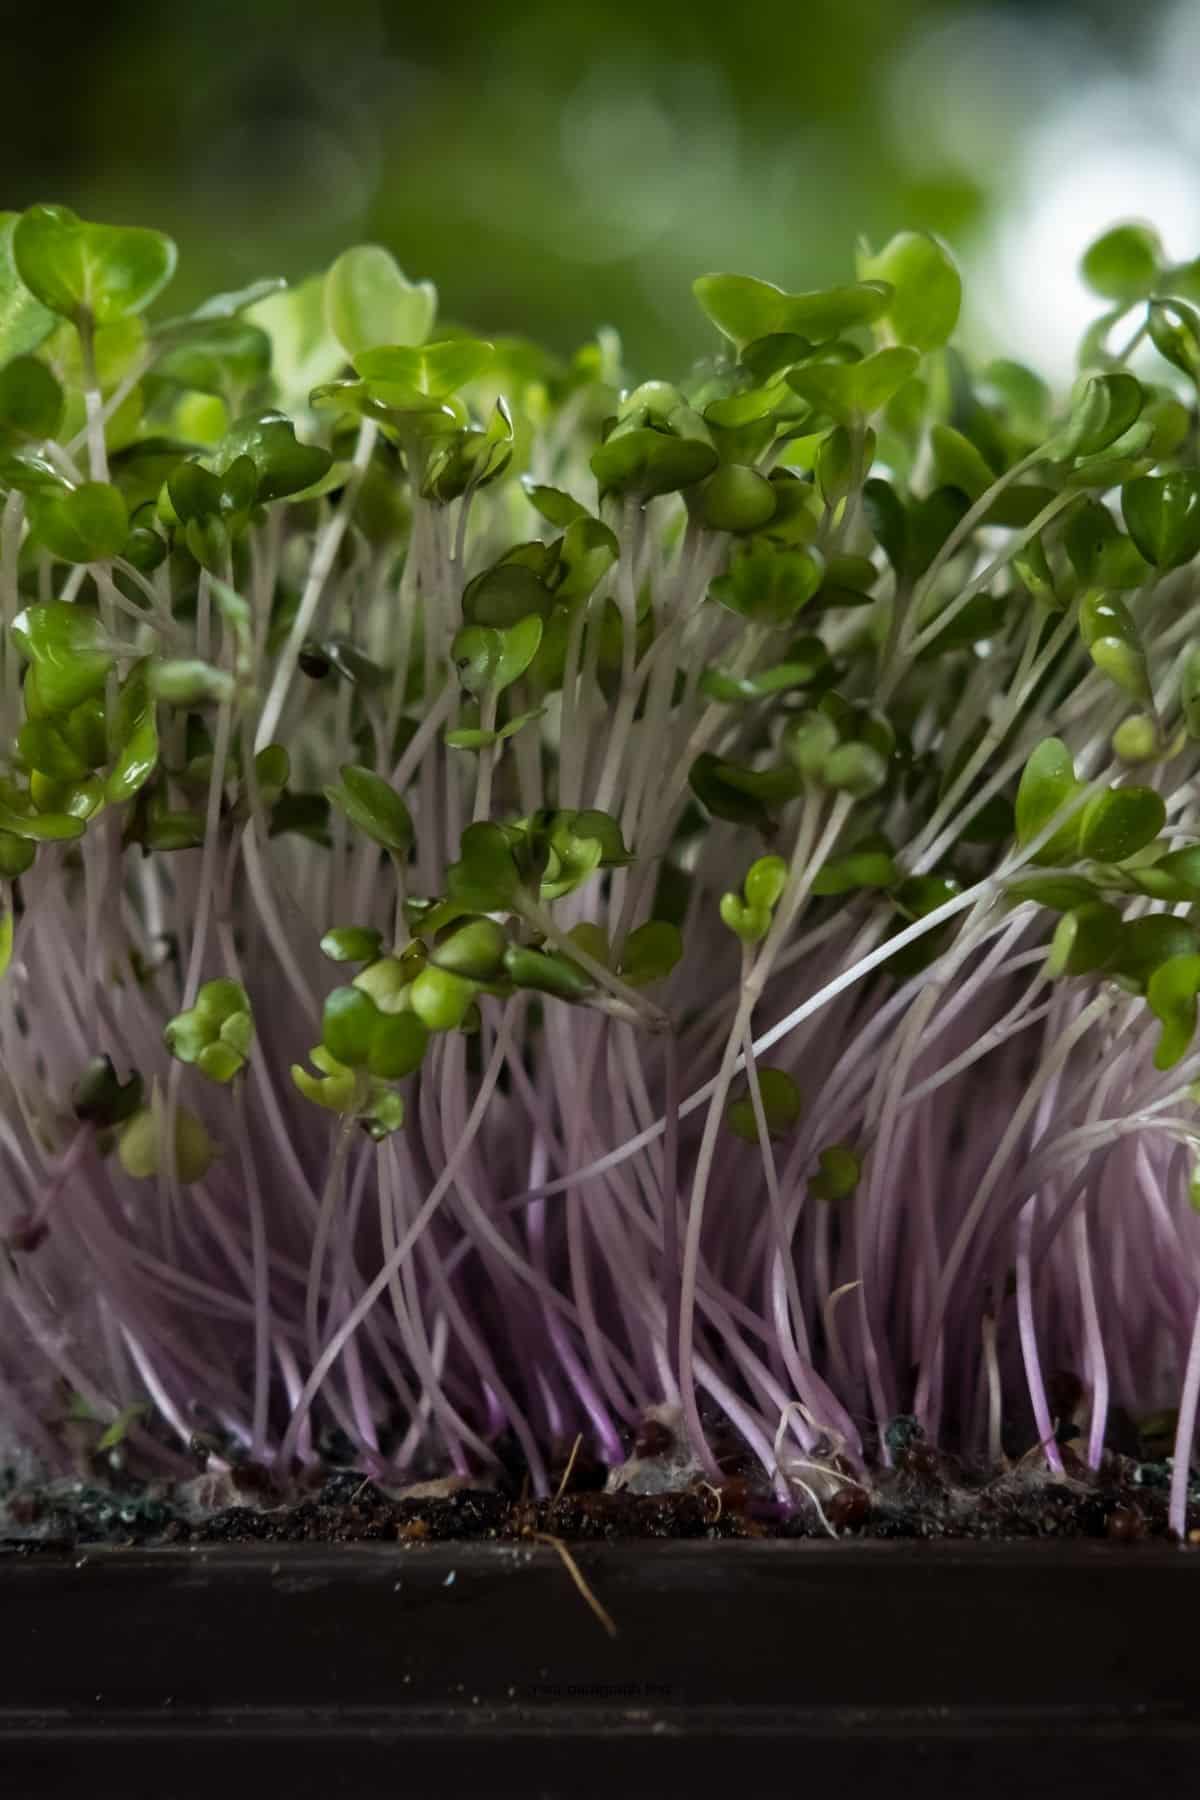 Close up of cabbage microgreens in a tray.